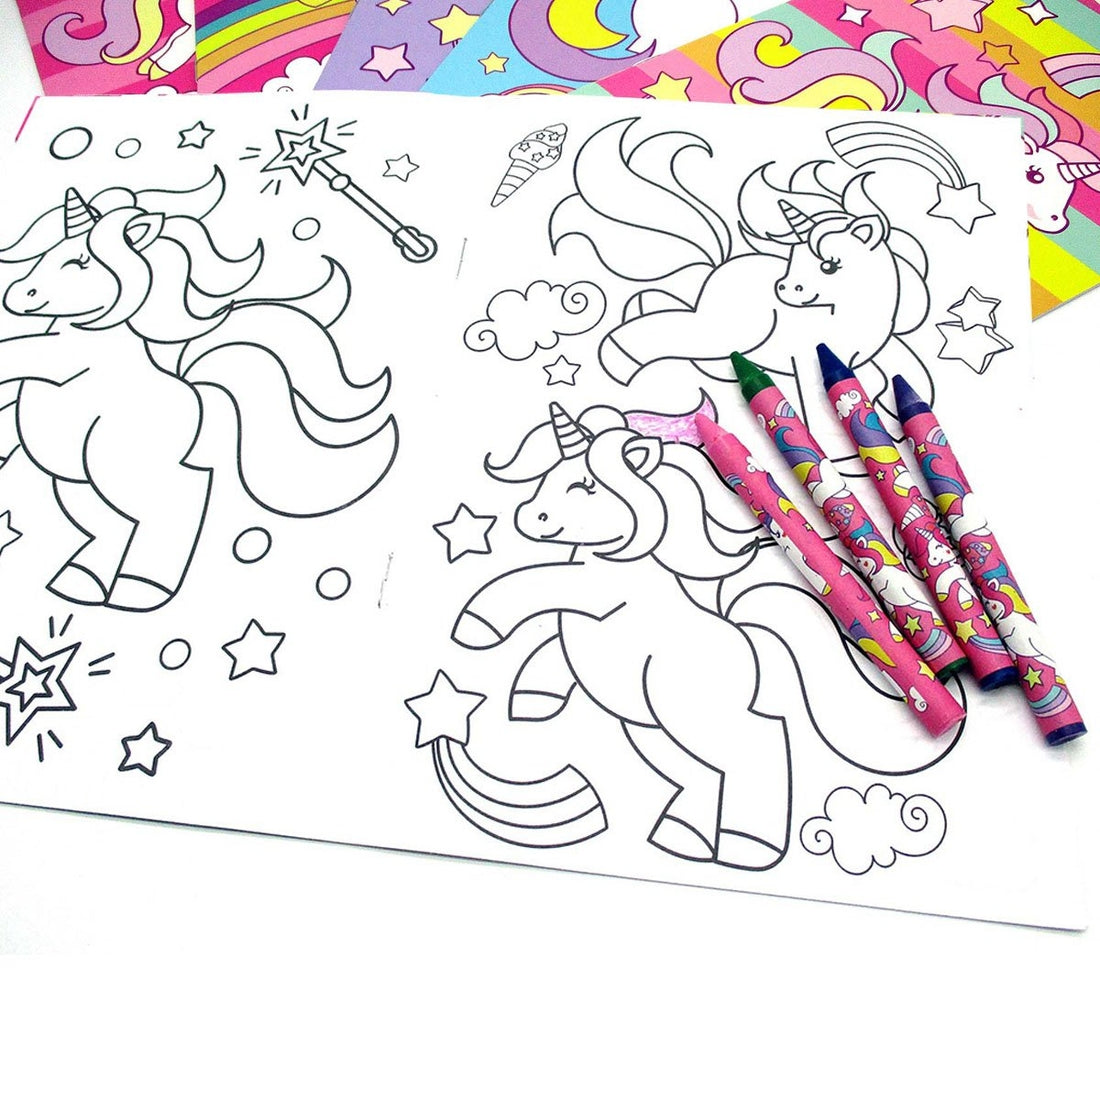 Unicorn Coloring Book with Crayons  - Doodlebug's Children's Boutique